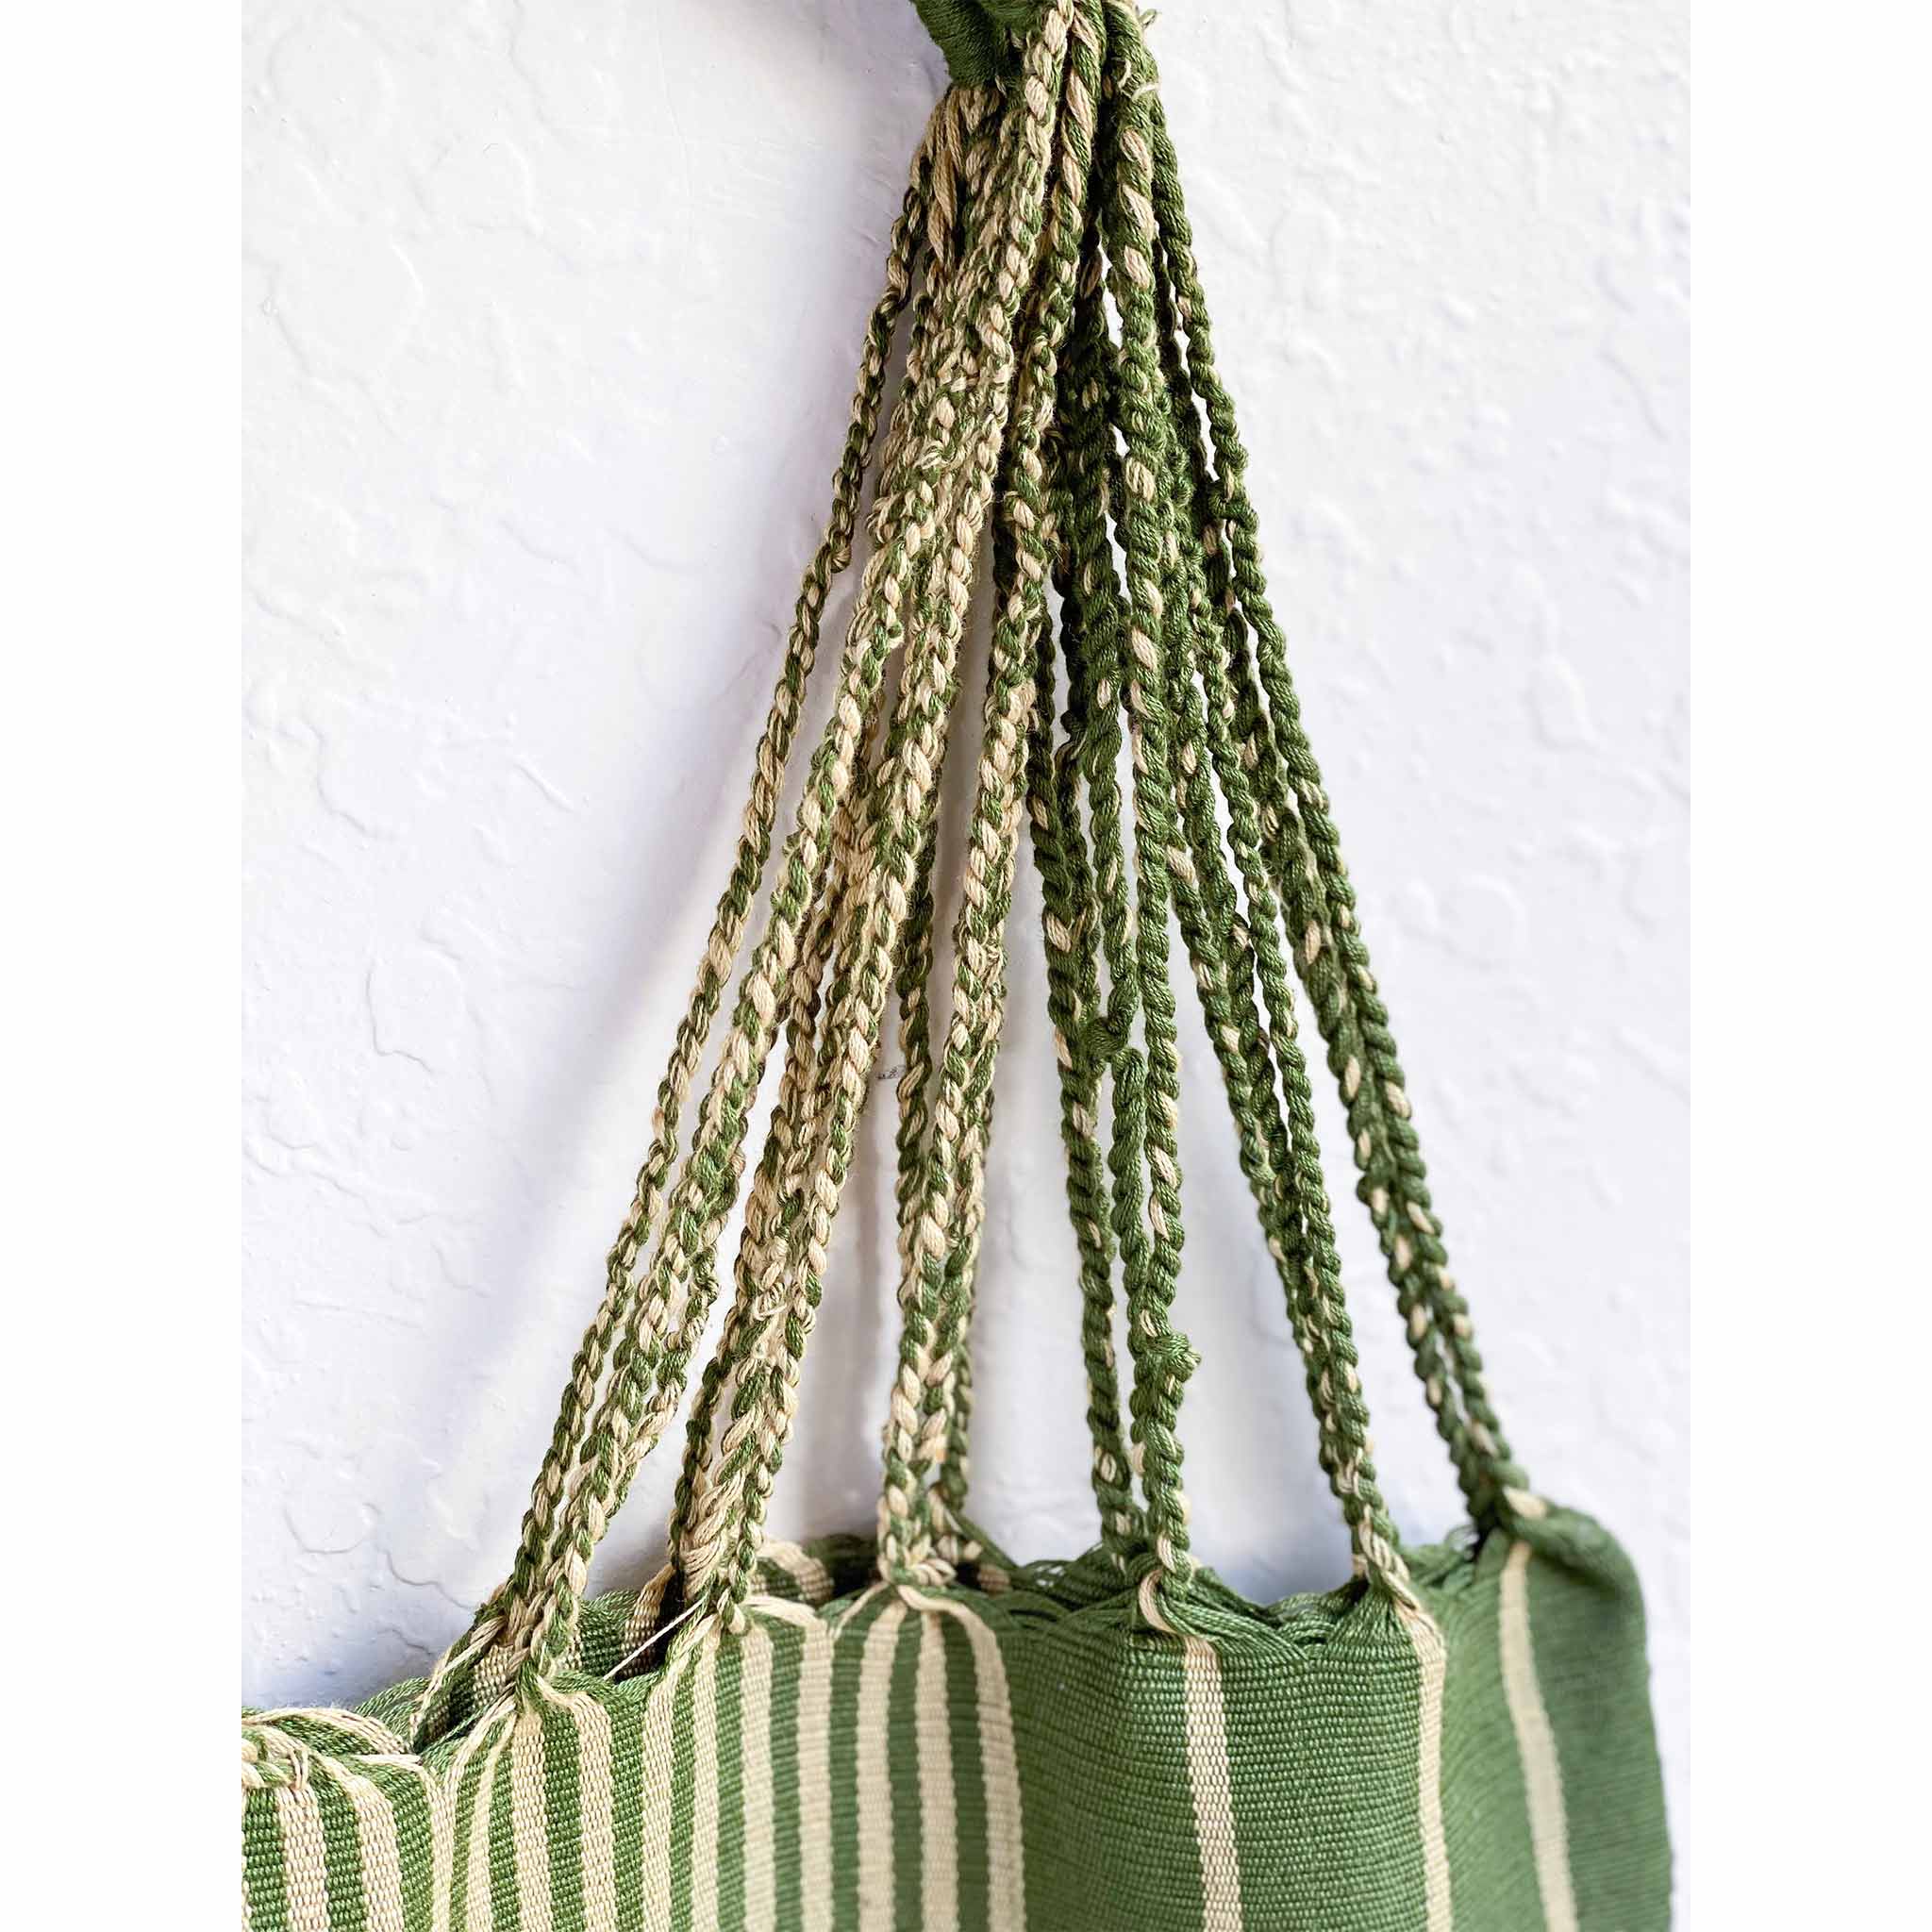 Handwoven Cotton Tote - Olive and Beige